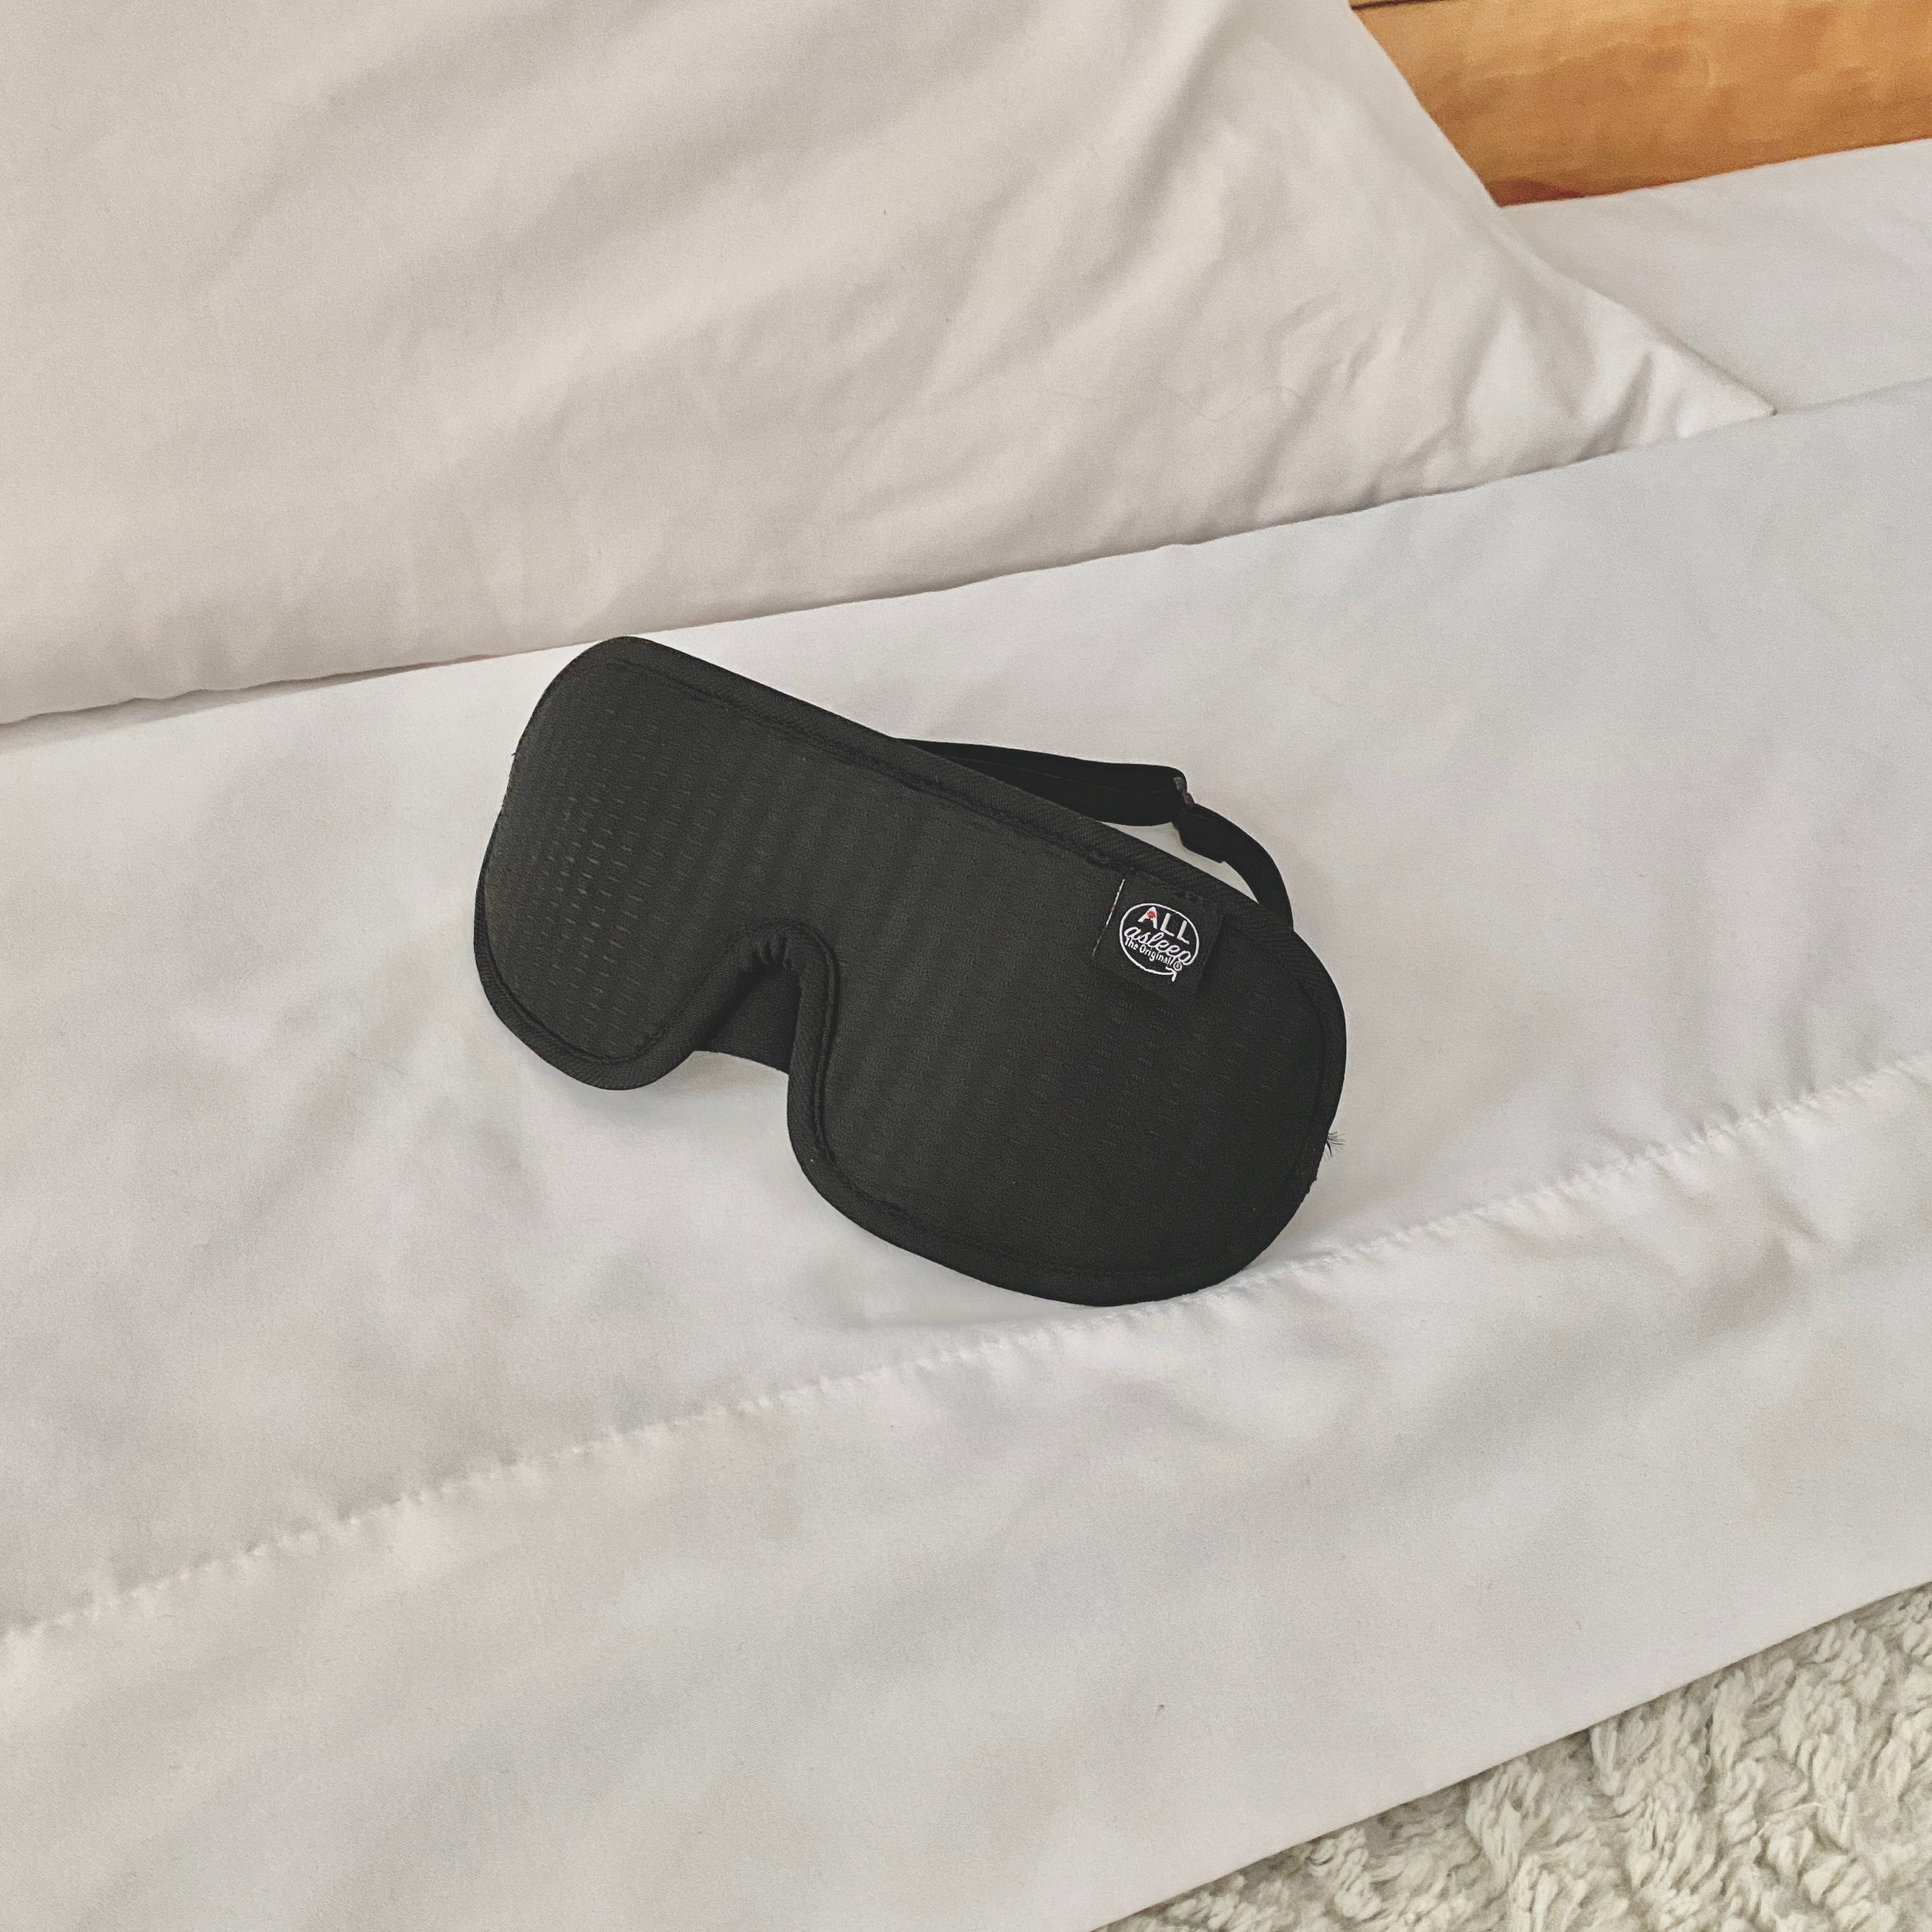 ALLasleep sleep mask laying near the pillow of a bed